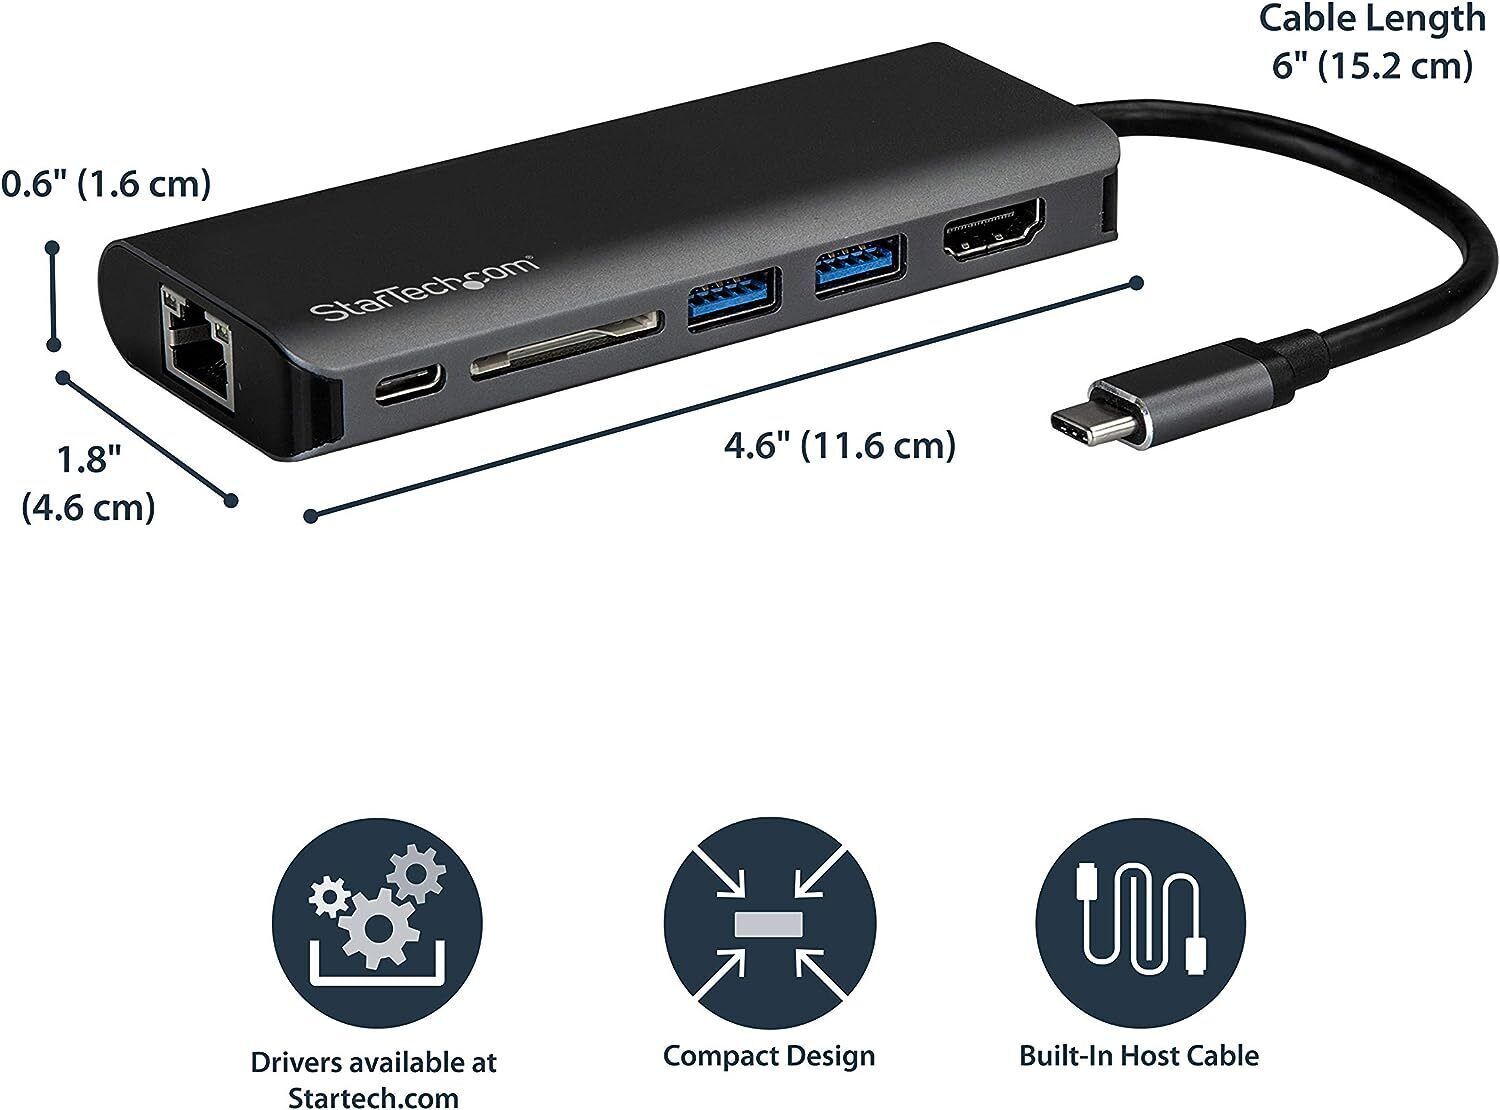 Multiport USB Station Adapter Docking Hub Laptop HDMI Type Type-C with Dock 3.0 - RLO Tech